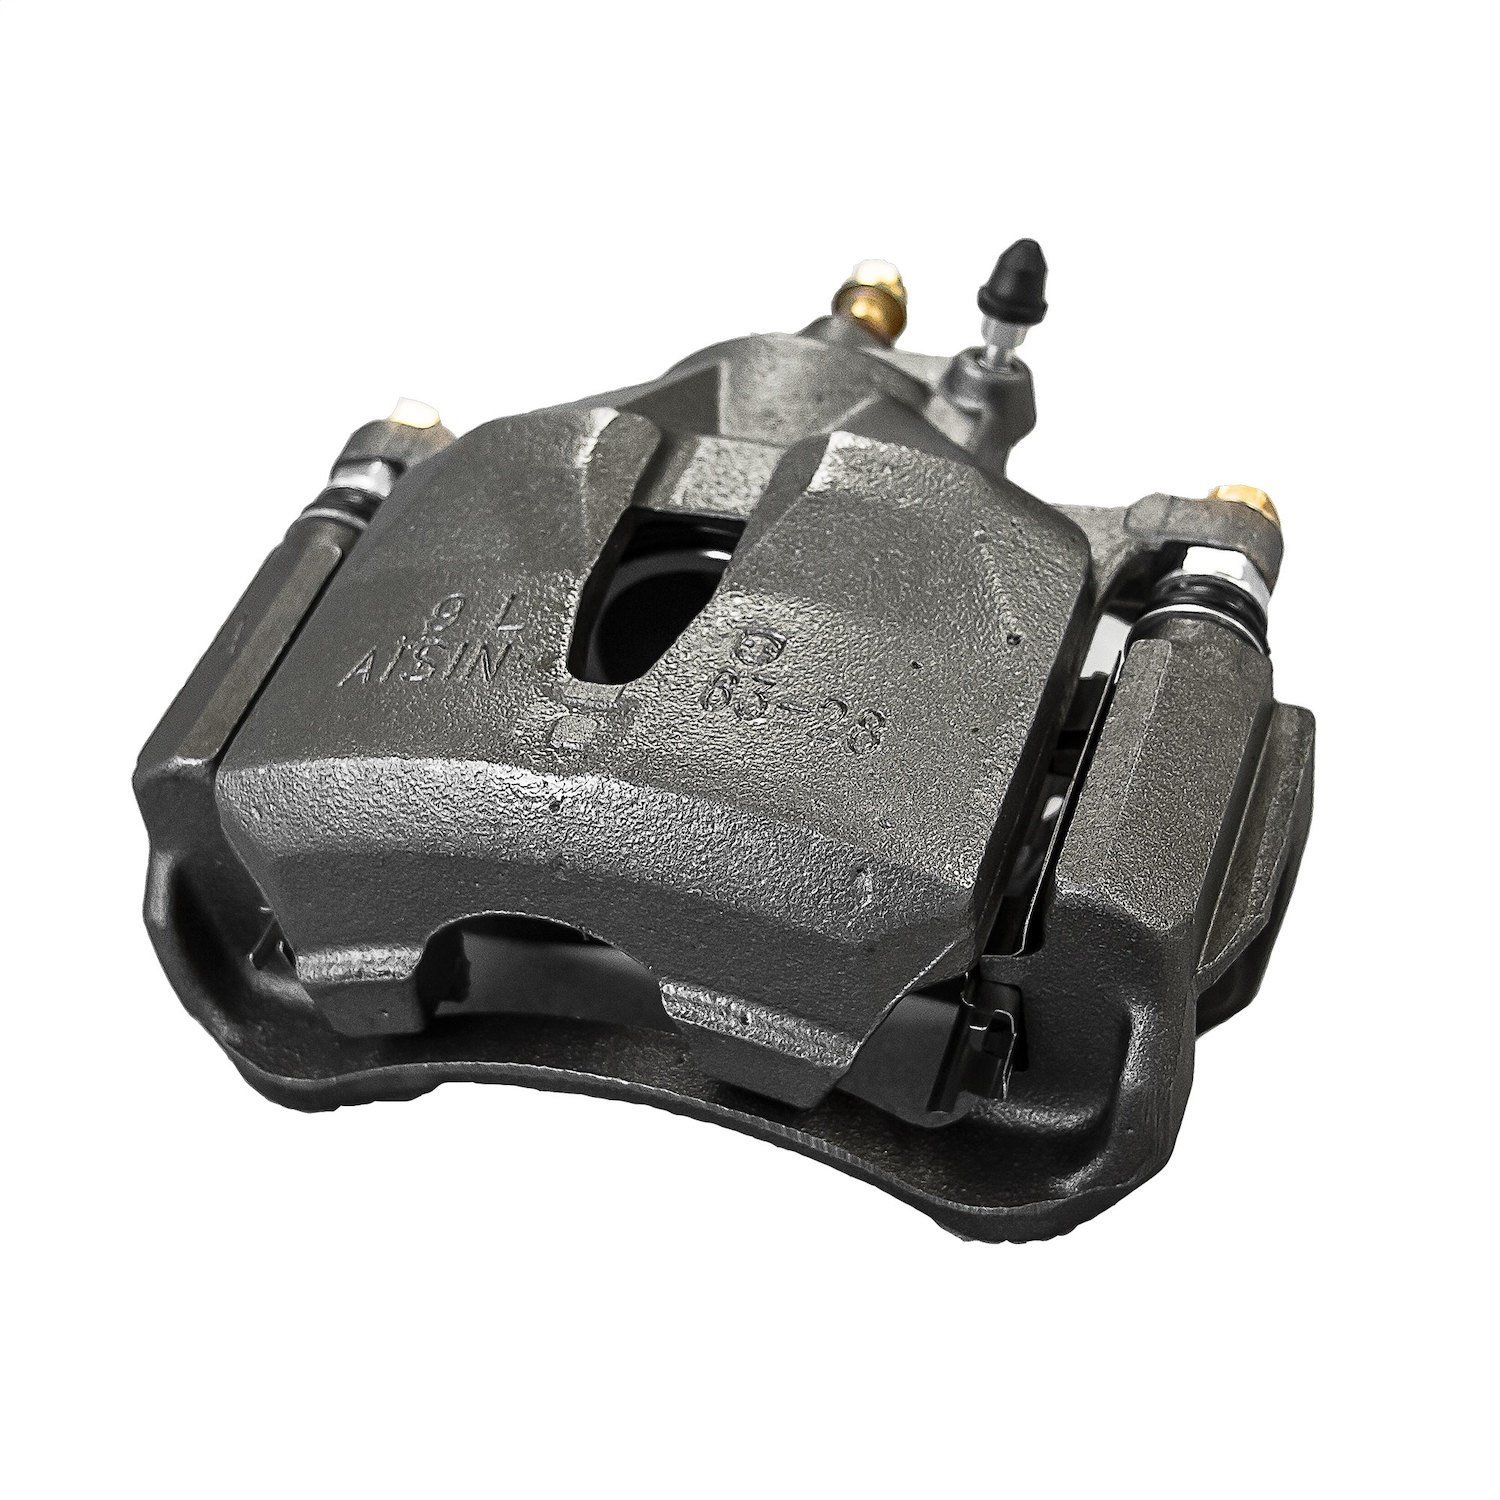 OE REPLACEMENT CALIPER Front 97-93 Nissan Truck D21 Pickup/97-96 Nissan Truck D21 Pickup/04-98 Nissa